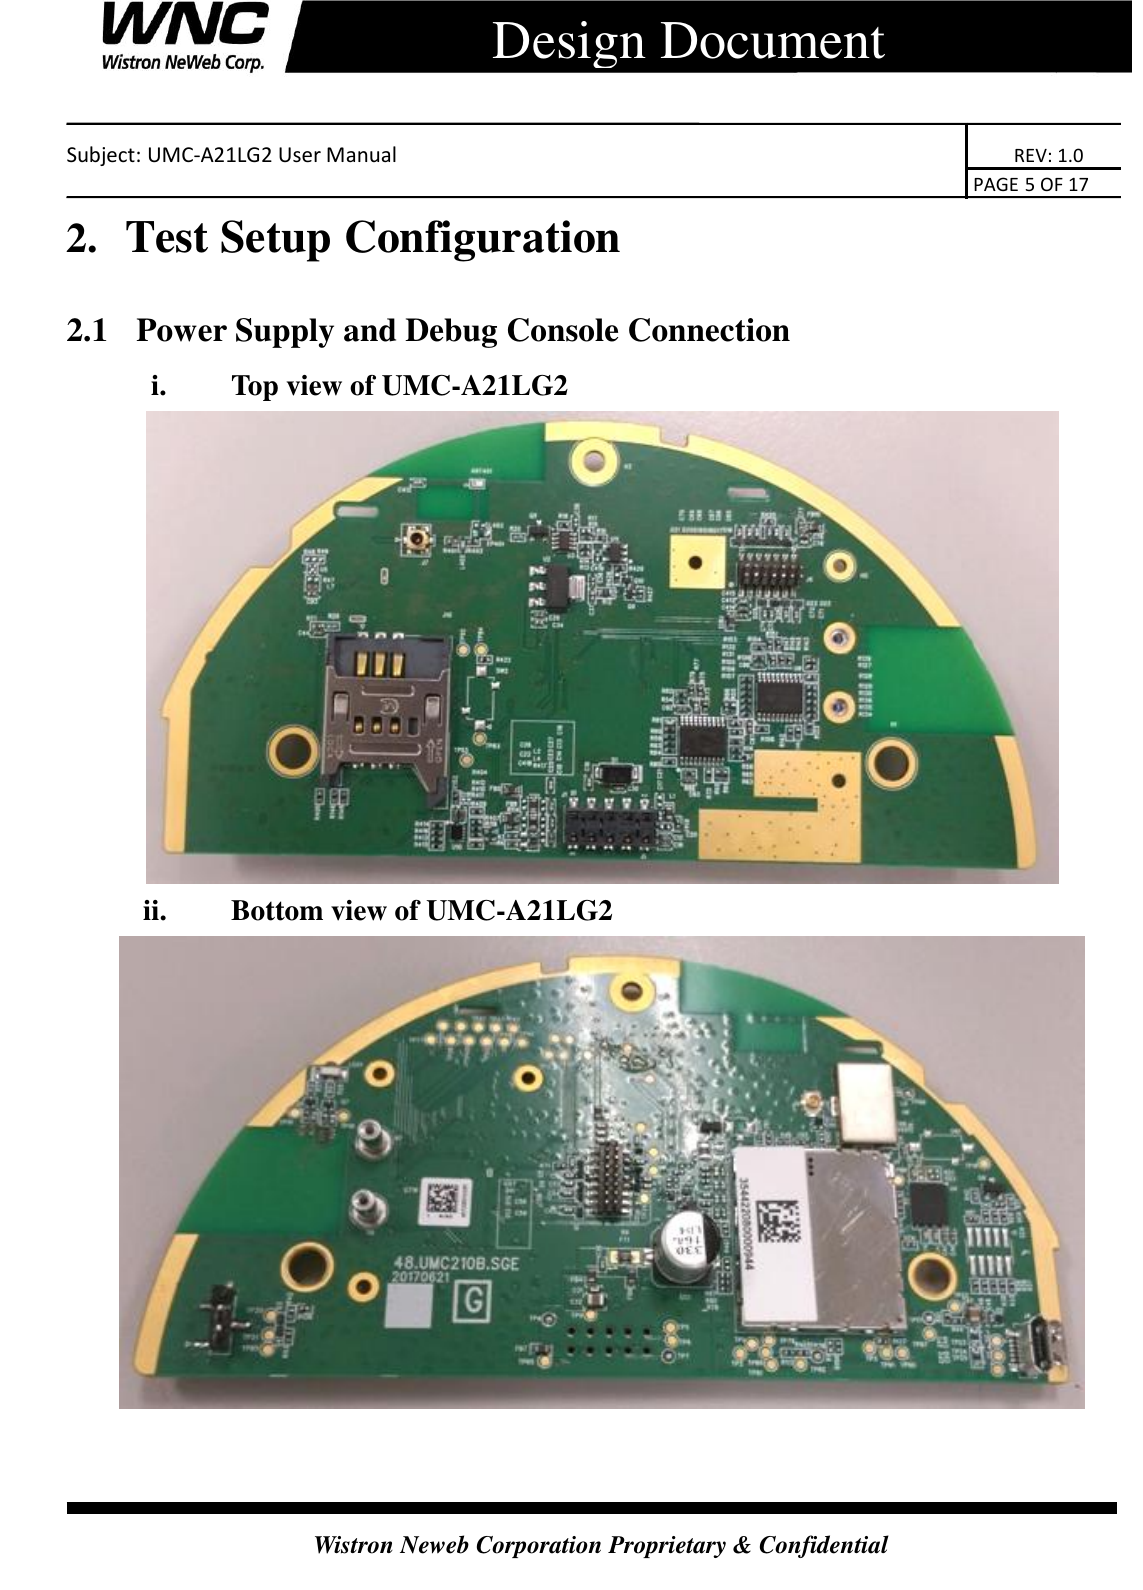    Subject: UMC-A21LG2 User Manual                                                                      REV: 1.0                                                                                        PAGE 5 OF 17  Wistron Neweb Corporation Proprietary &amp; Confidential      Design Document 2.  Test Setup Configuration 2.1   Power Supply and Debug Console Connection i.   Top view of UMC-A21LG2  ii.   Bottom view of UMC-A21LG2    